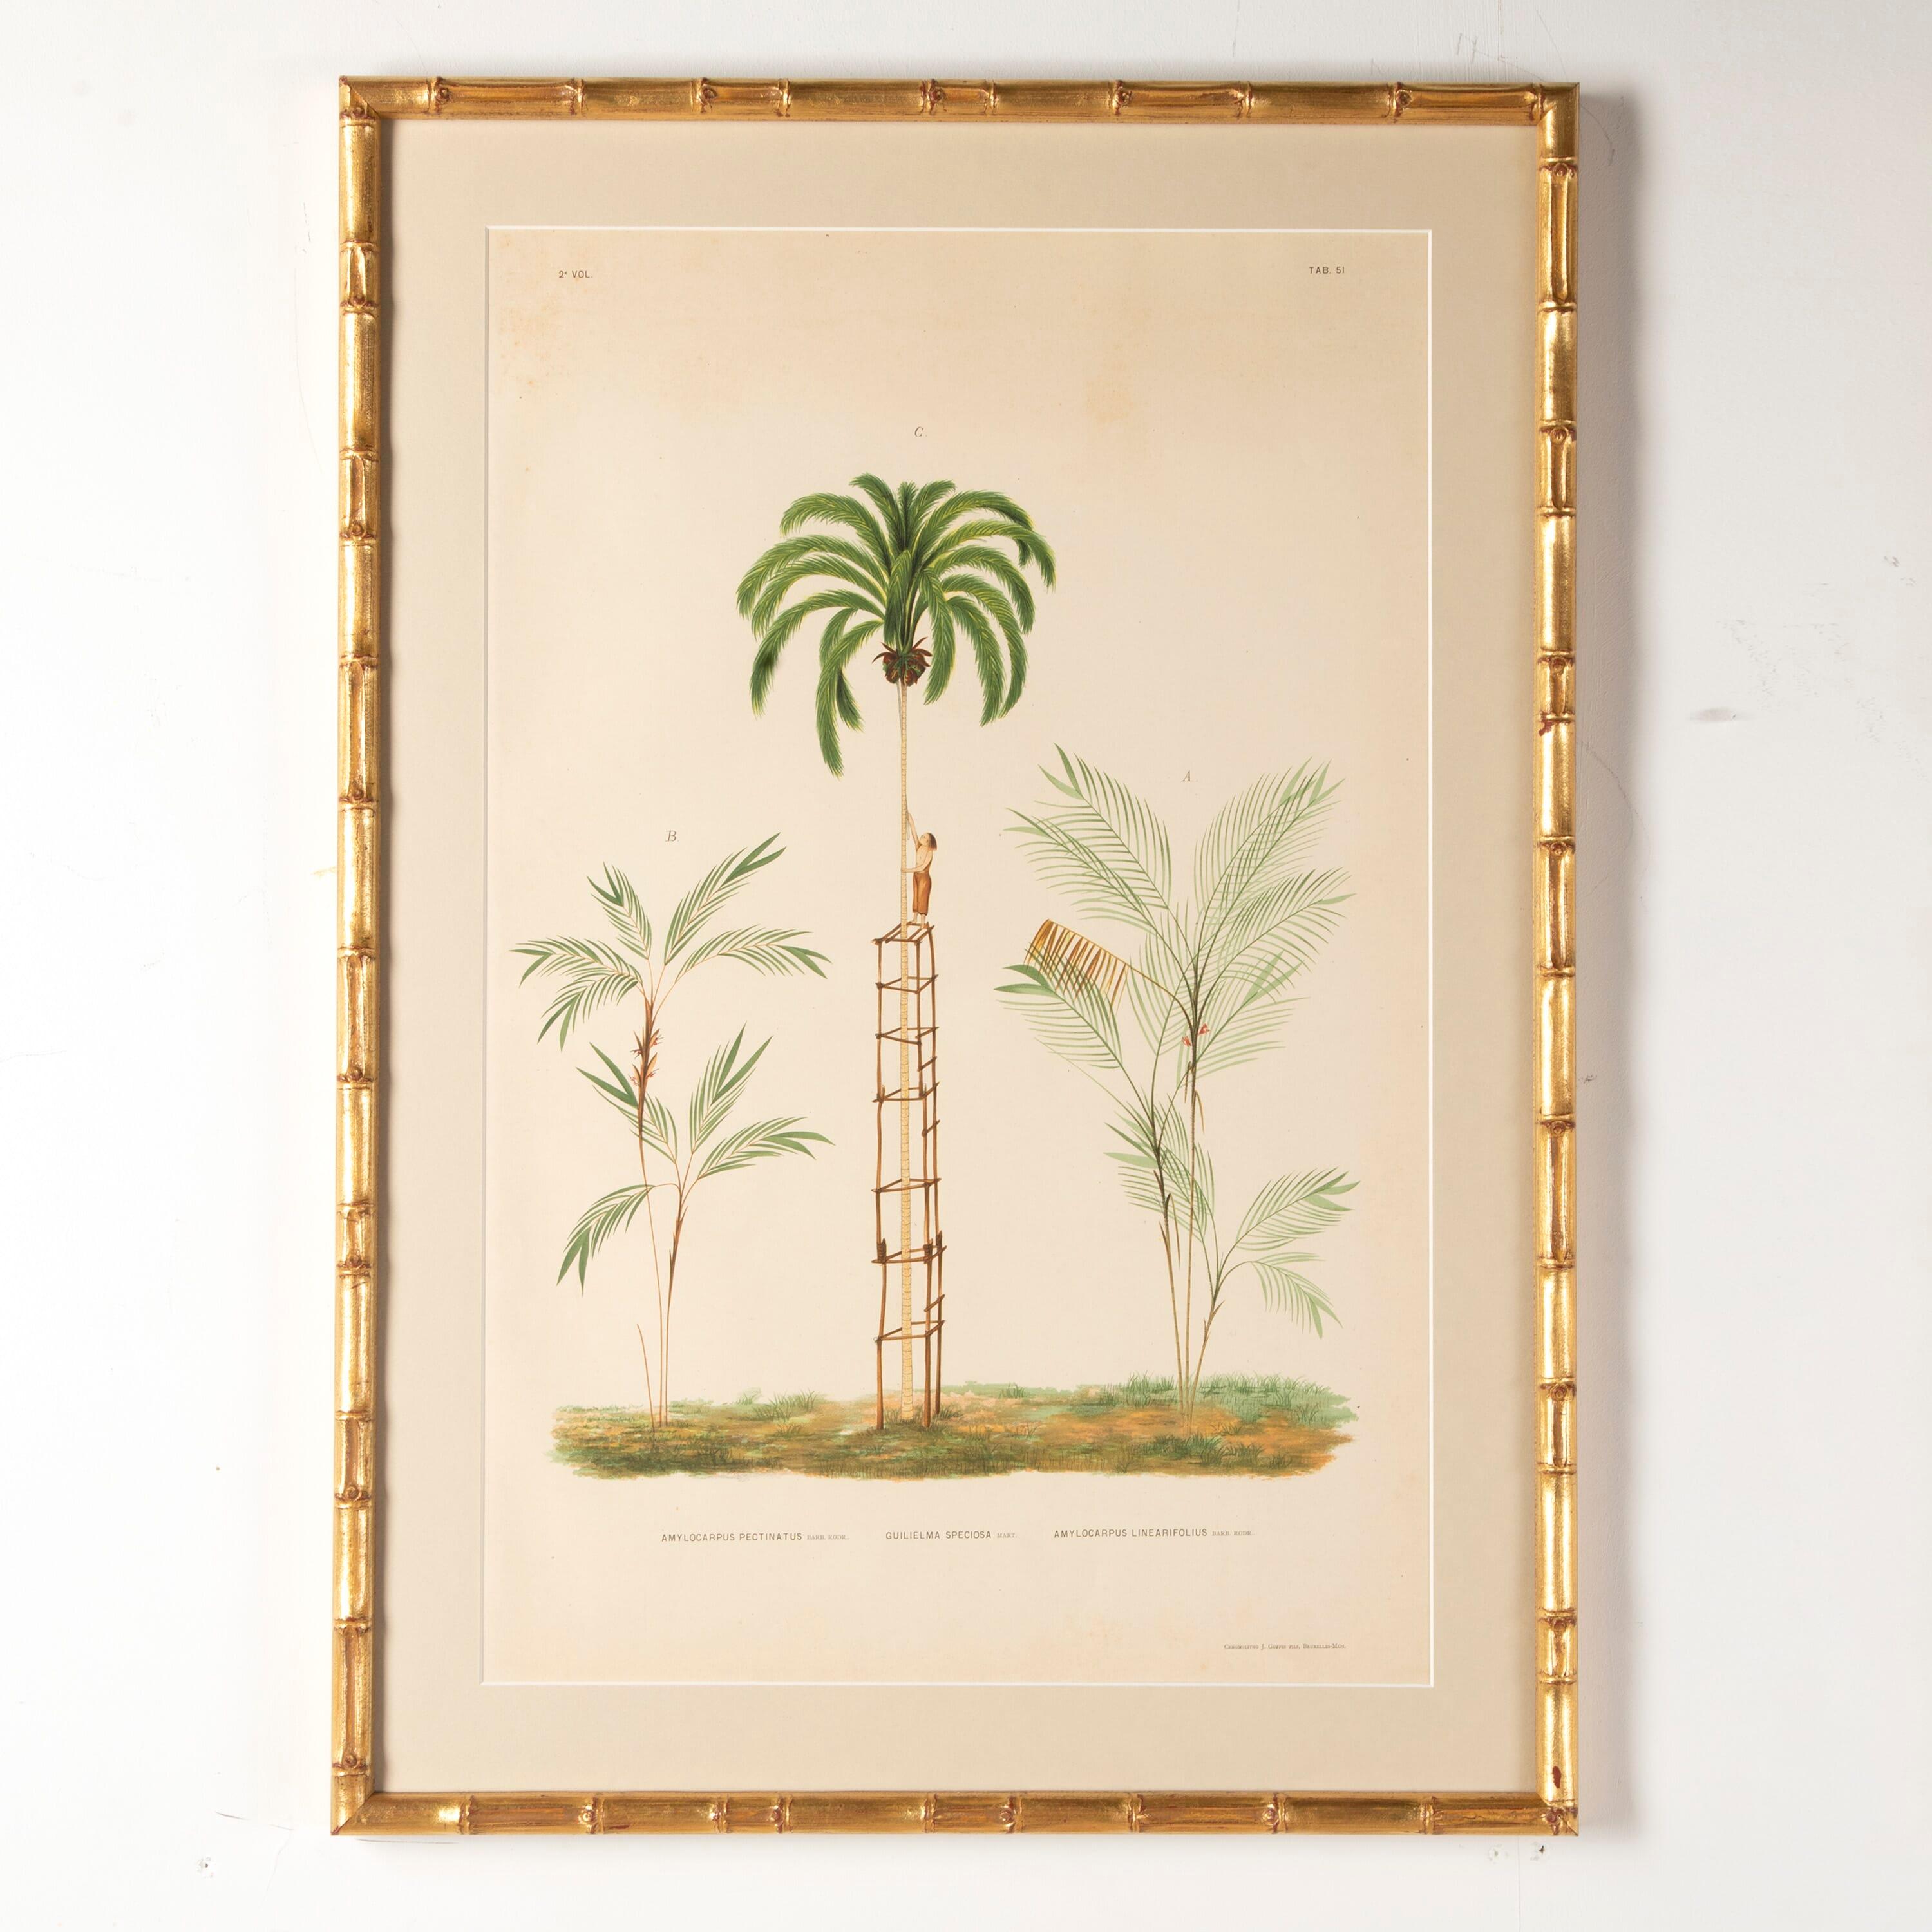 Beautiful set of chromolithographs by Brazilian Palms by Joao Barbosa Rodrigues.

These prints are original 1st editions that are dated 1903. All are framed in gilt bamboo with Ar70 art glass for optimal clarity.

This is a truly stunning